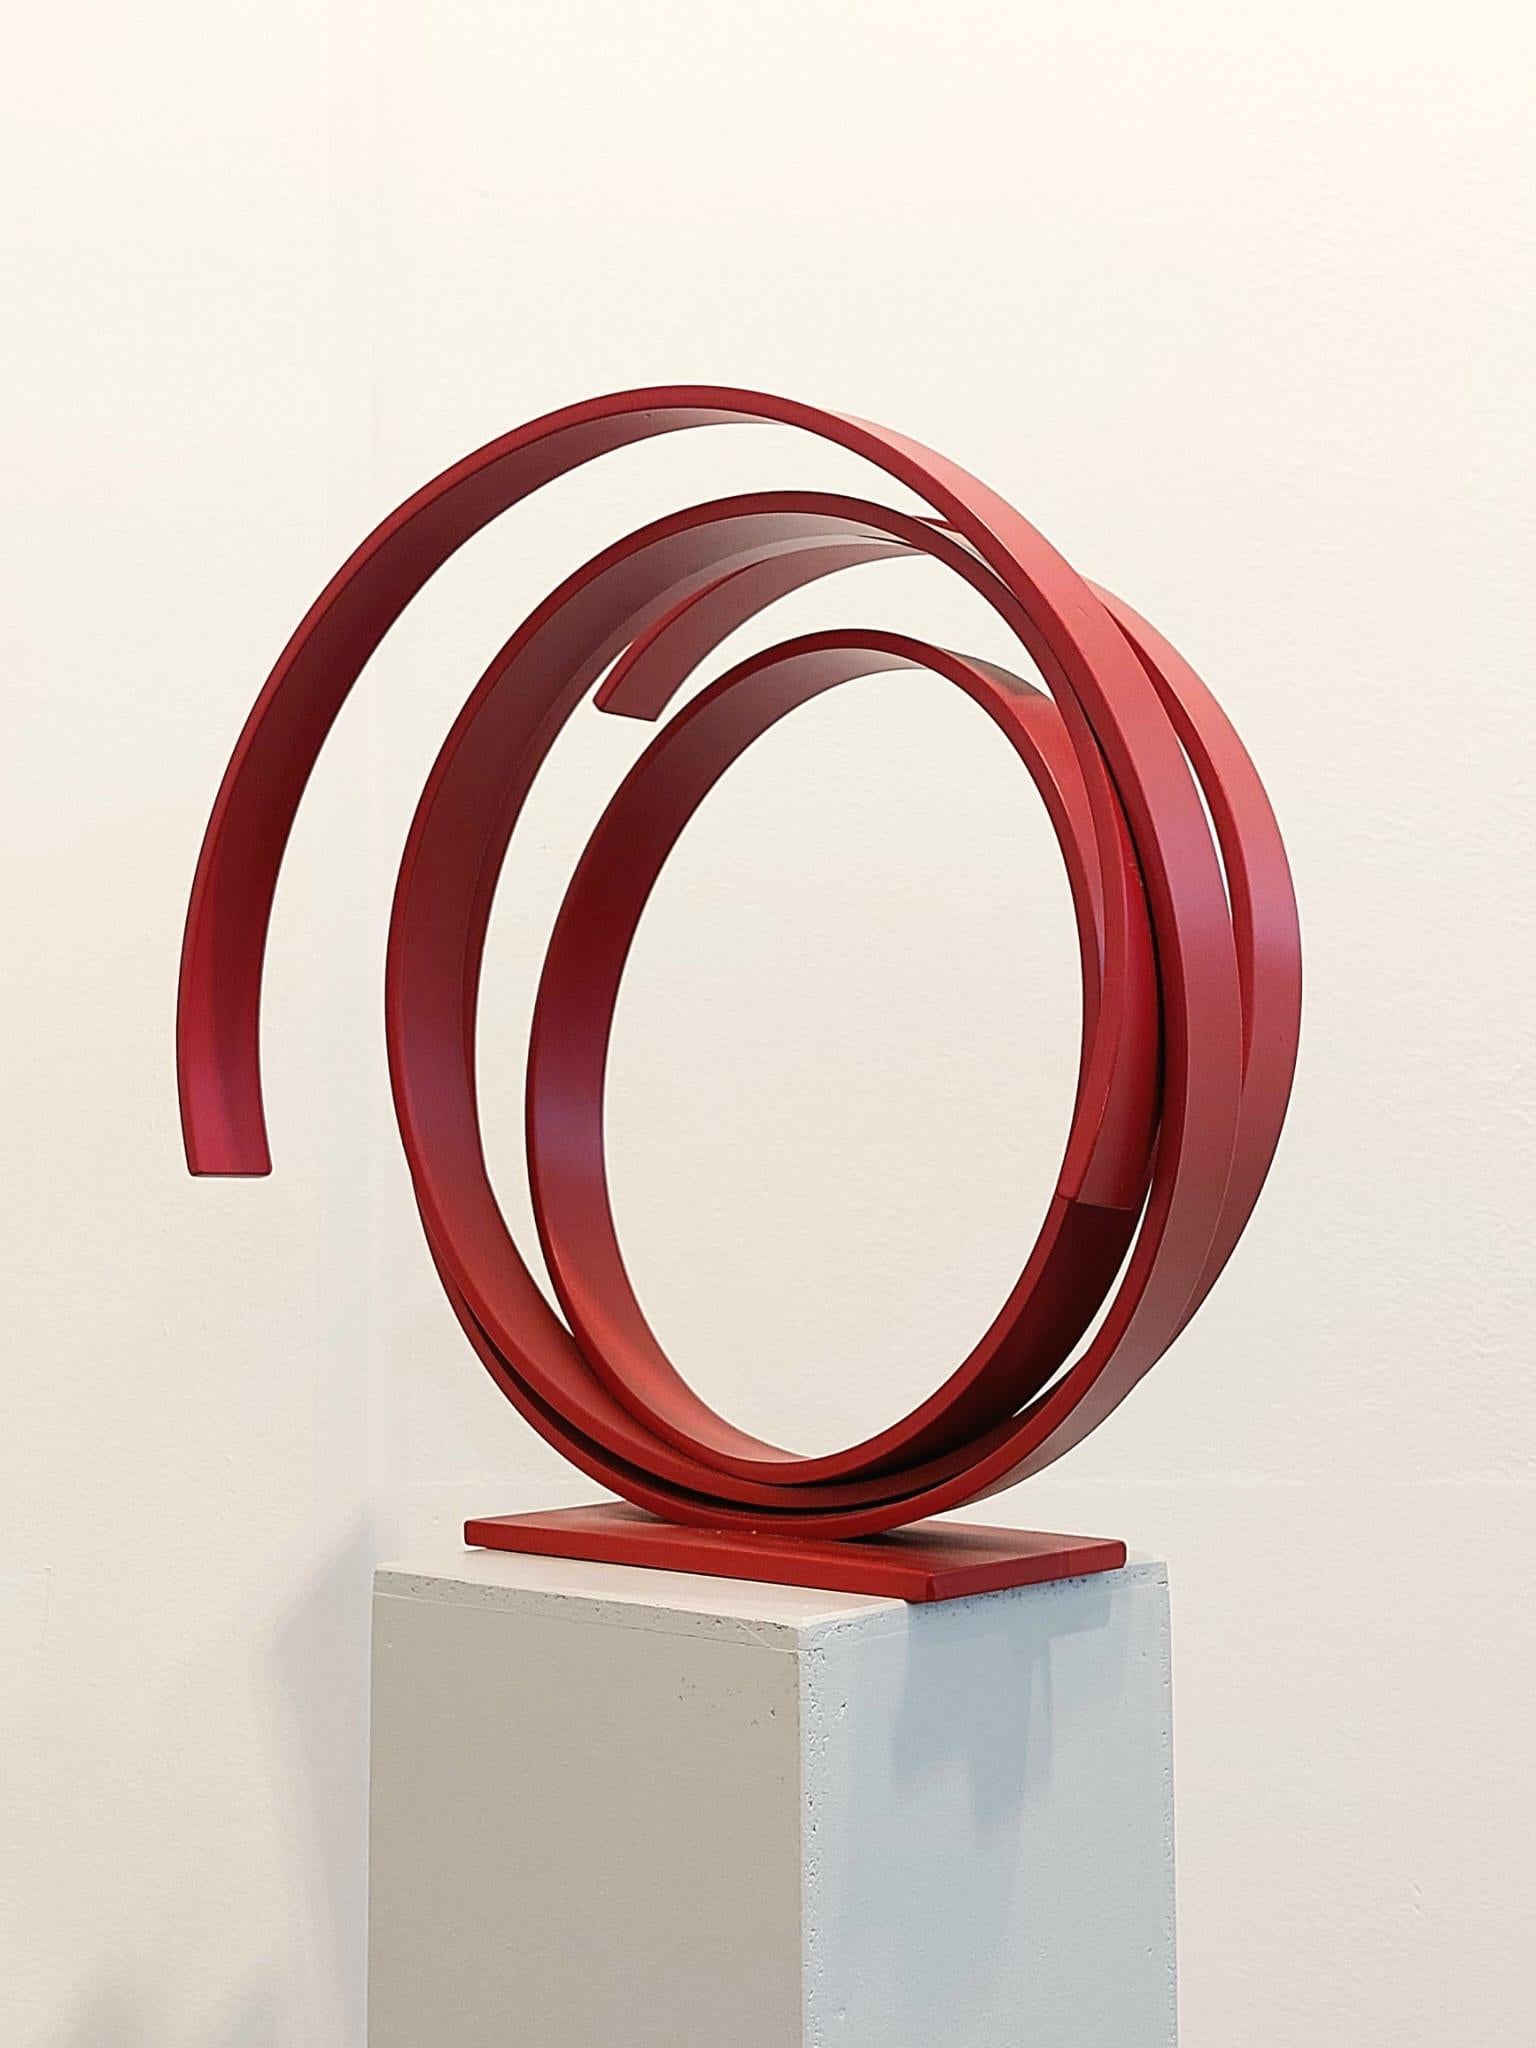 A large contemporary red powder coated steel sculpture. Beautiful on the floor or a pedestal. 
A contemporary statement piece full of elegance and movement.
_______________________________________________________________________

Born in 1951 in